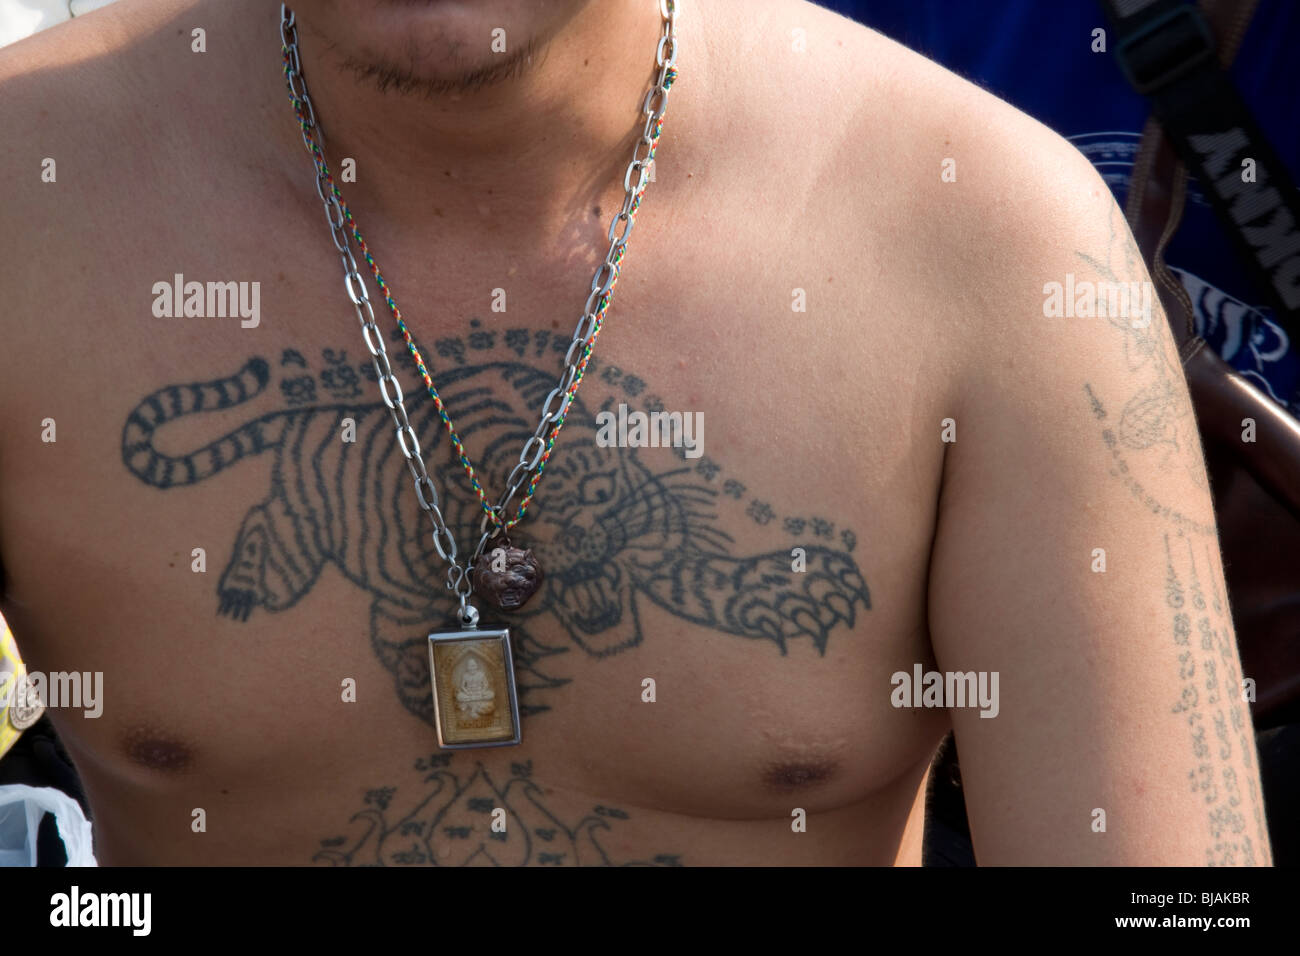 A young man`s tattooed chest at the Wat Bang Phra temple in Thailand, where monks tattoo their devotees with protective prayers. Stock Photo